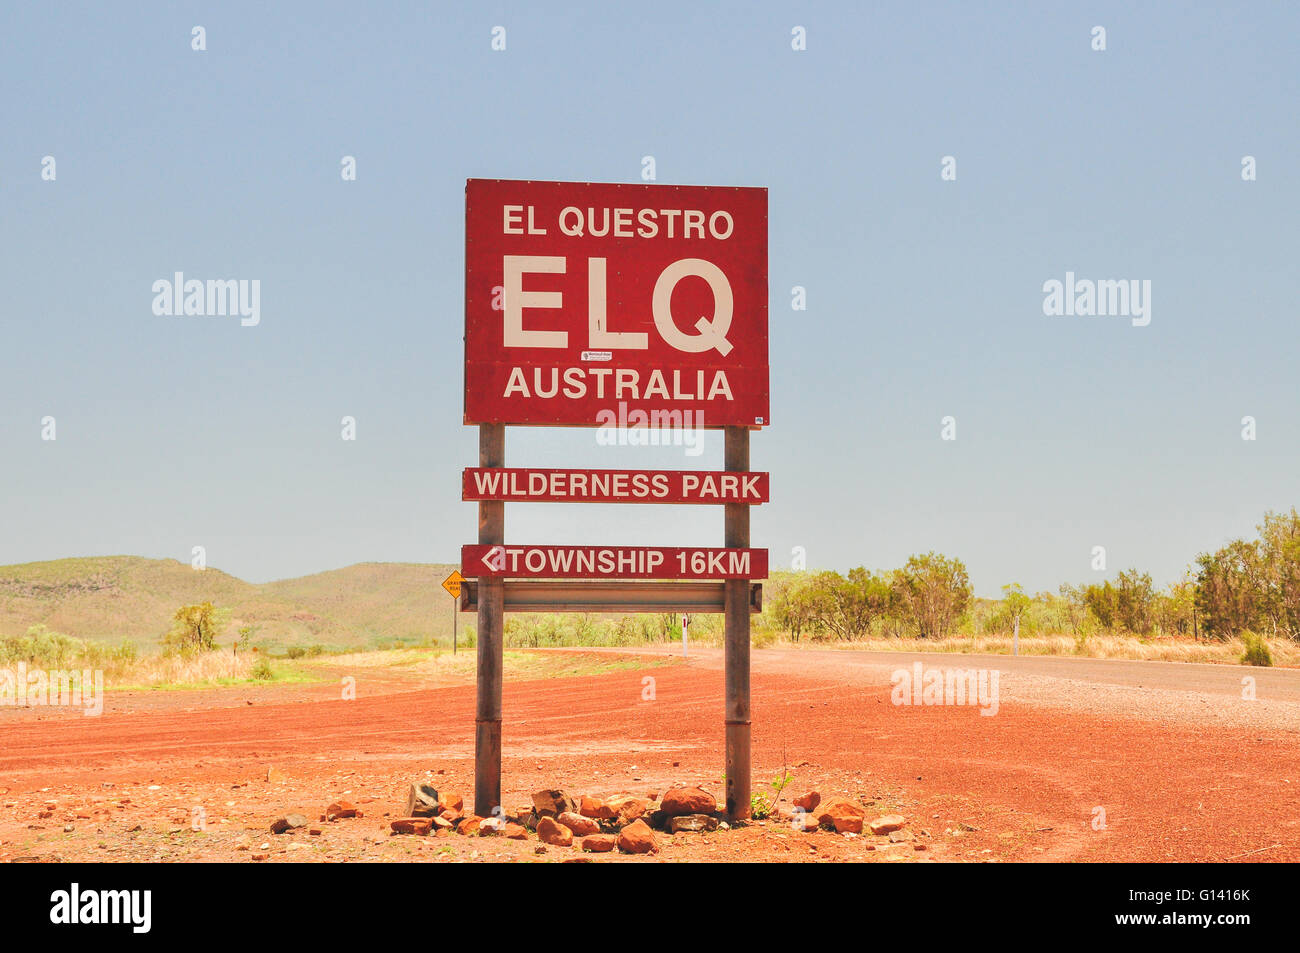 El Questro national park sign in the Kimberley, Western Australia Stock Photo